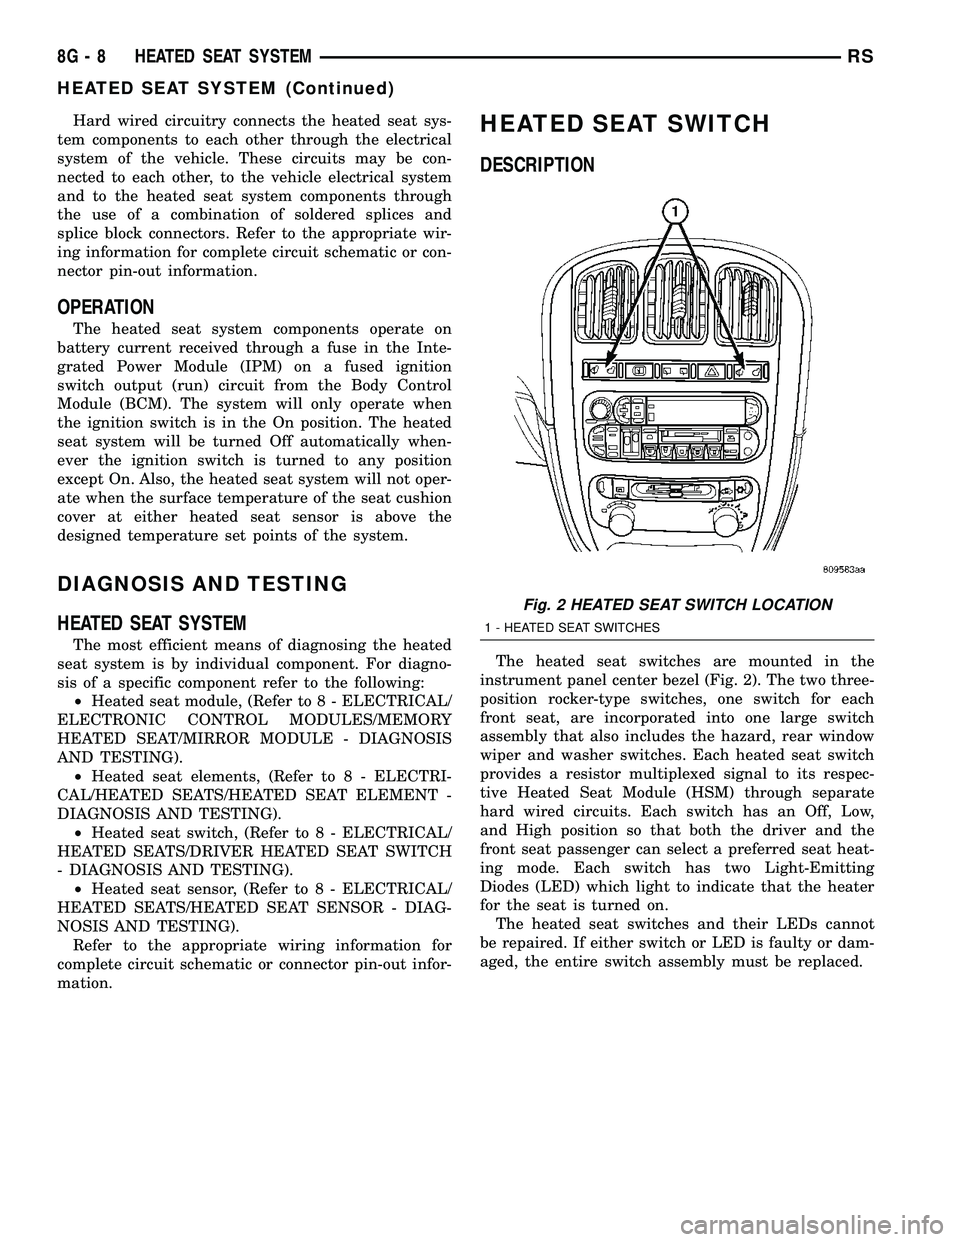 CHRYSLER CARAVAN 2005  Service Manual Hard wired circuitry connects the heated seat sys-
tem components to each other through the electrical
system of the vehicle. These circuits may be con-
nected to each other, to the vehicle electrical